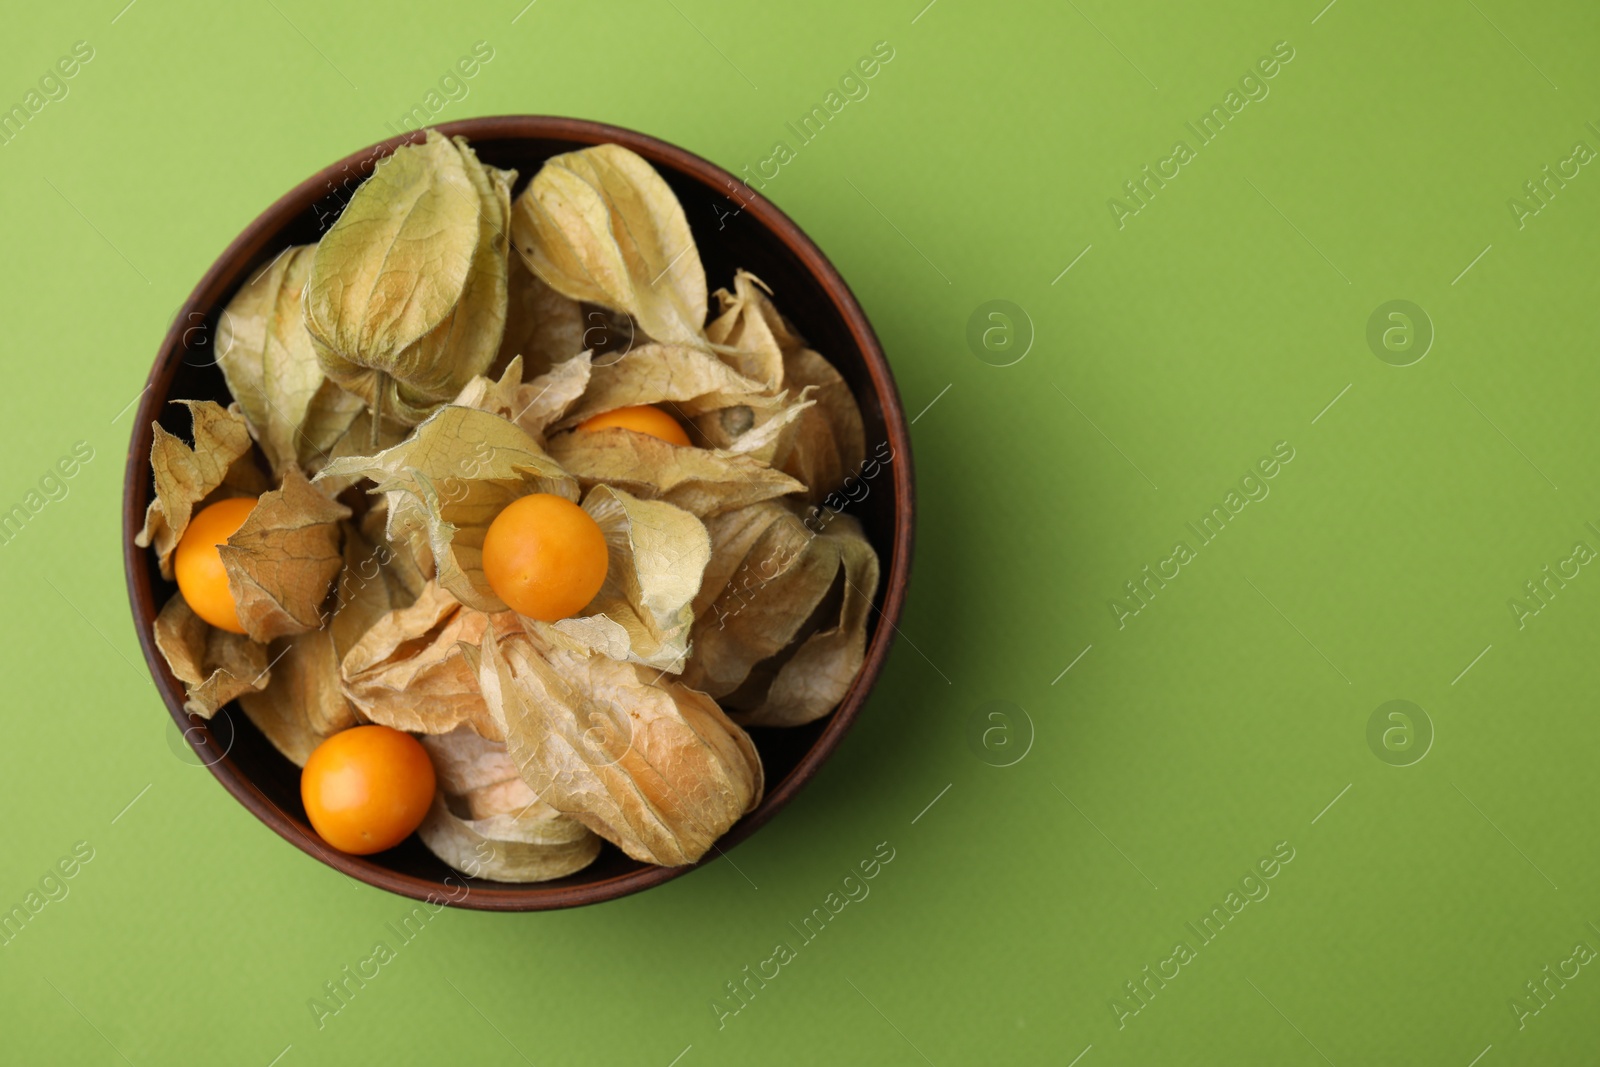 Photo of Ripe physalis fruits with calyxes in bowl on green background, top view. Space for text